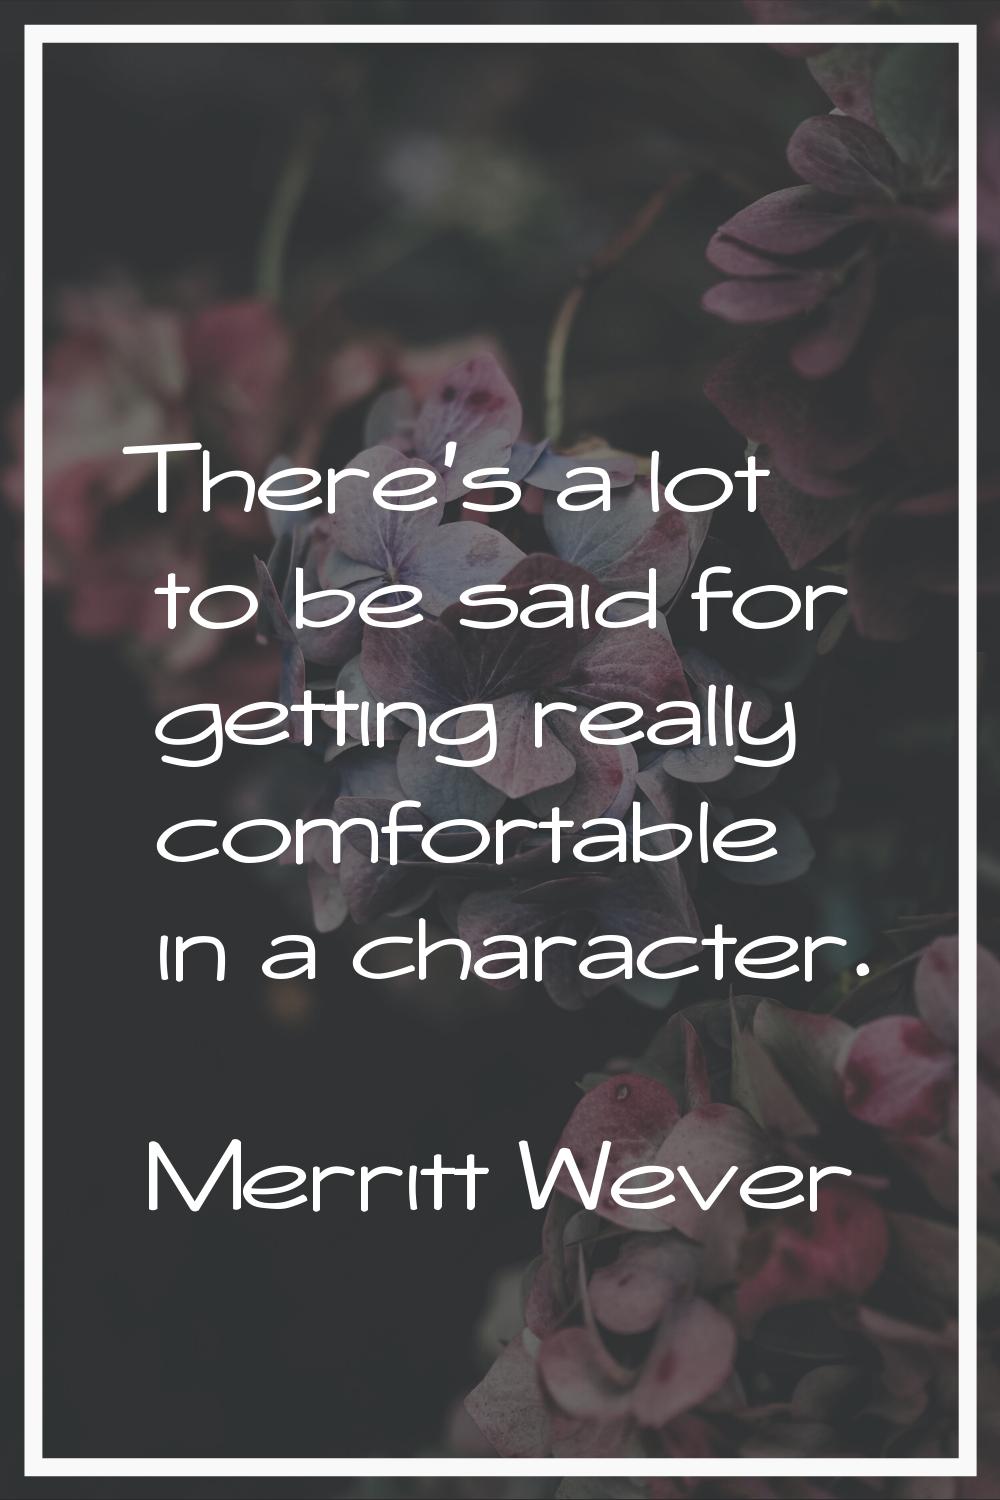 There's a lot to be said for getting really comfortable in a character.